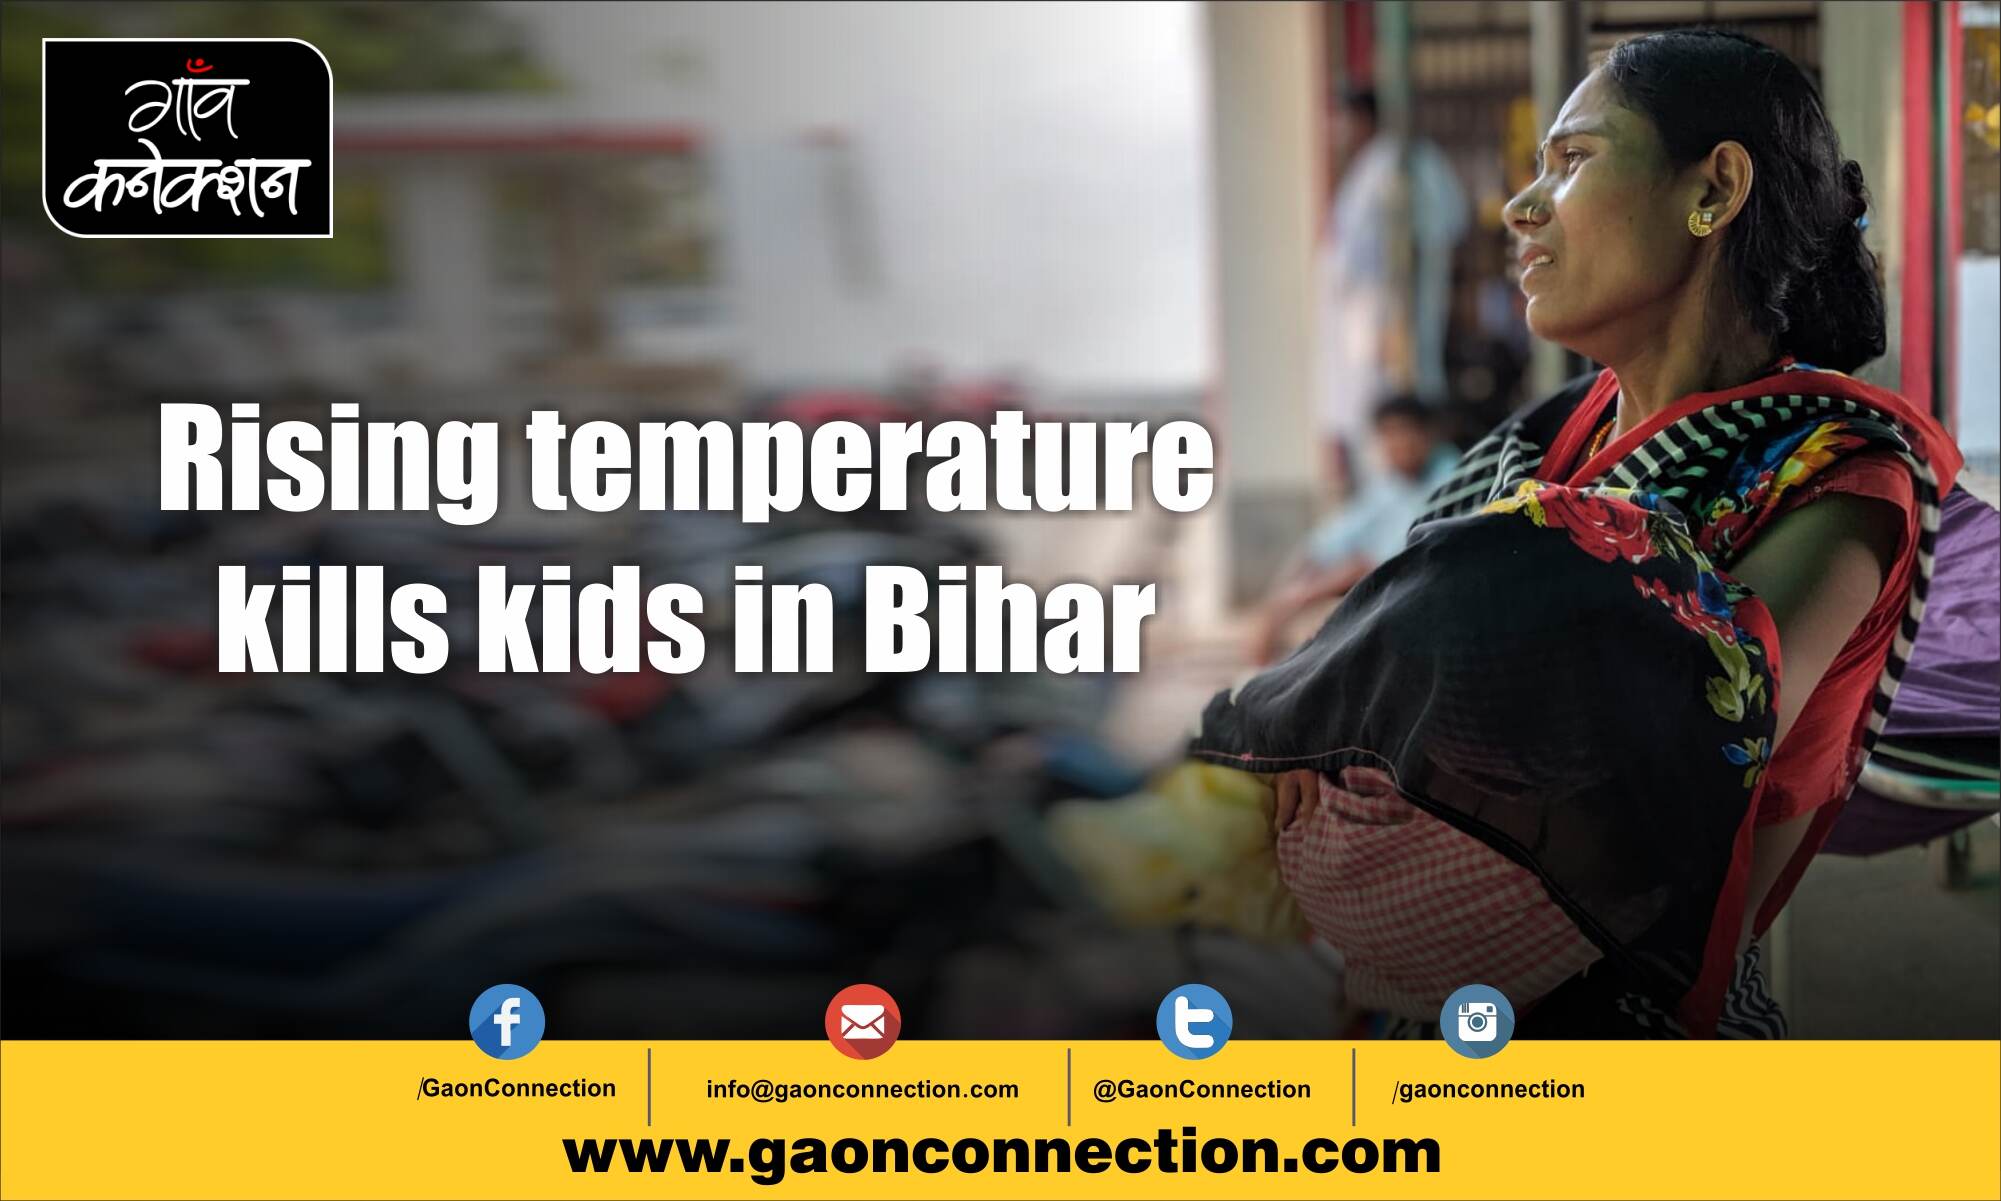 Are Kids in Bihar dying because of rising temperature?